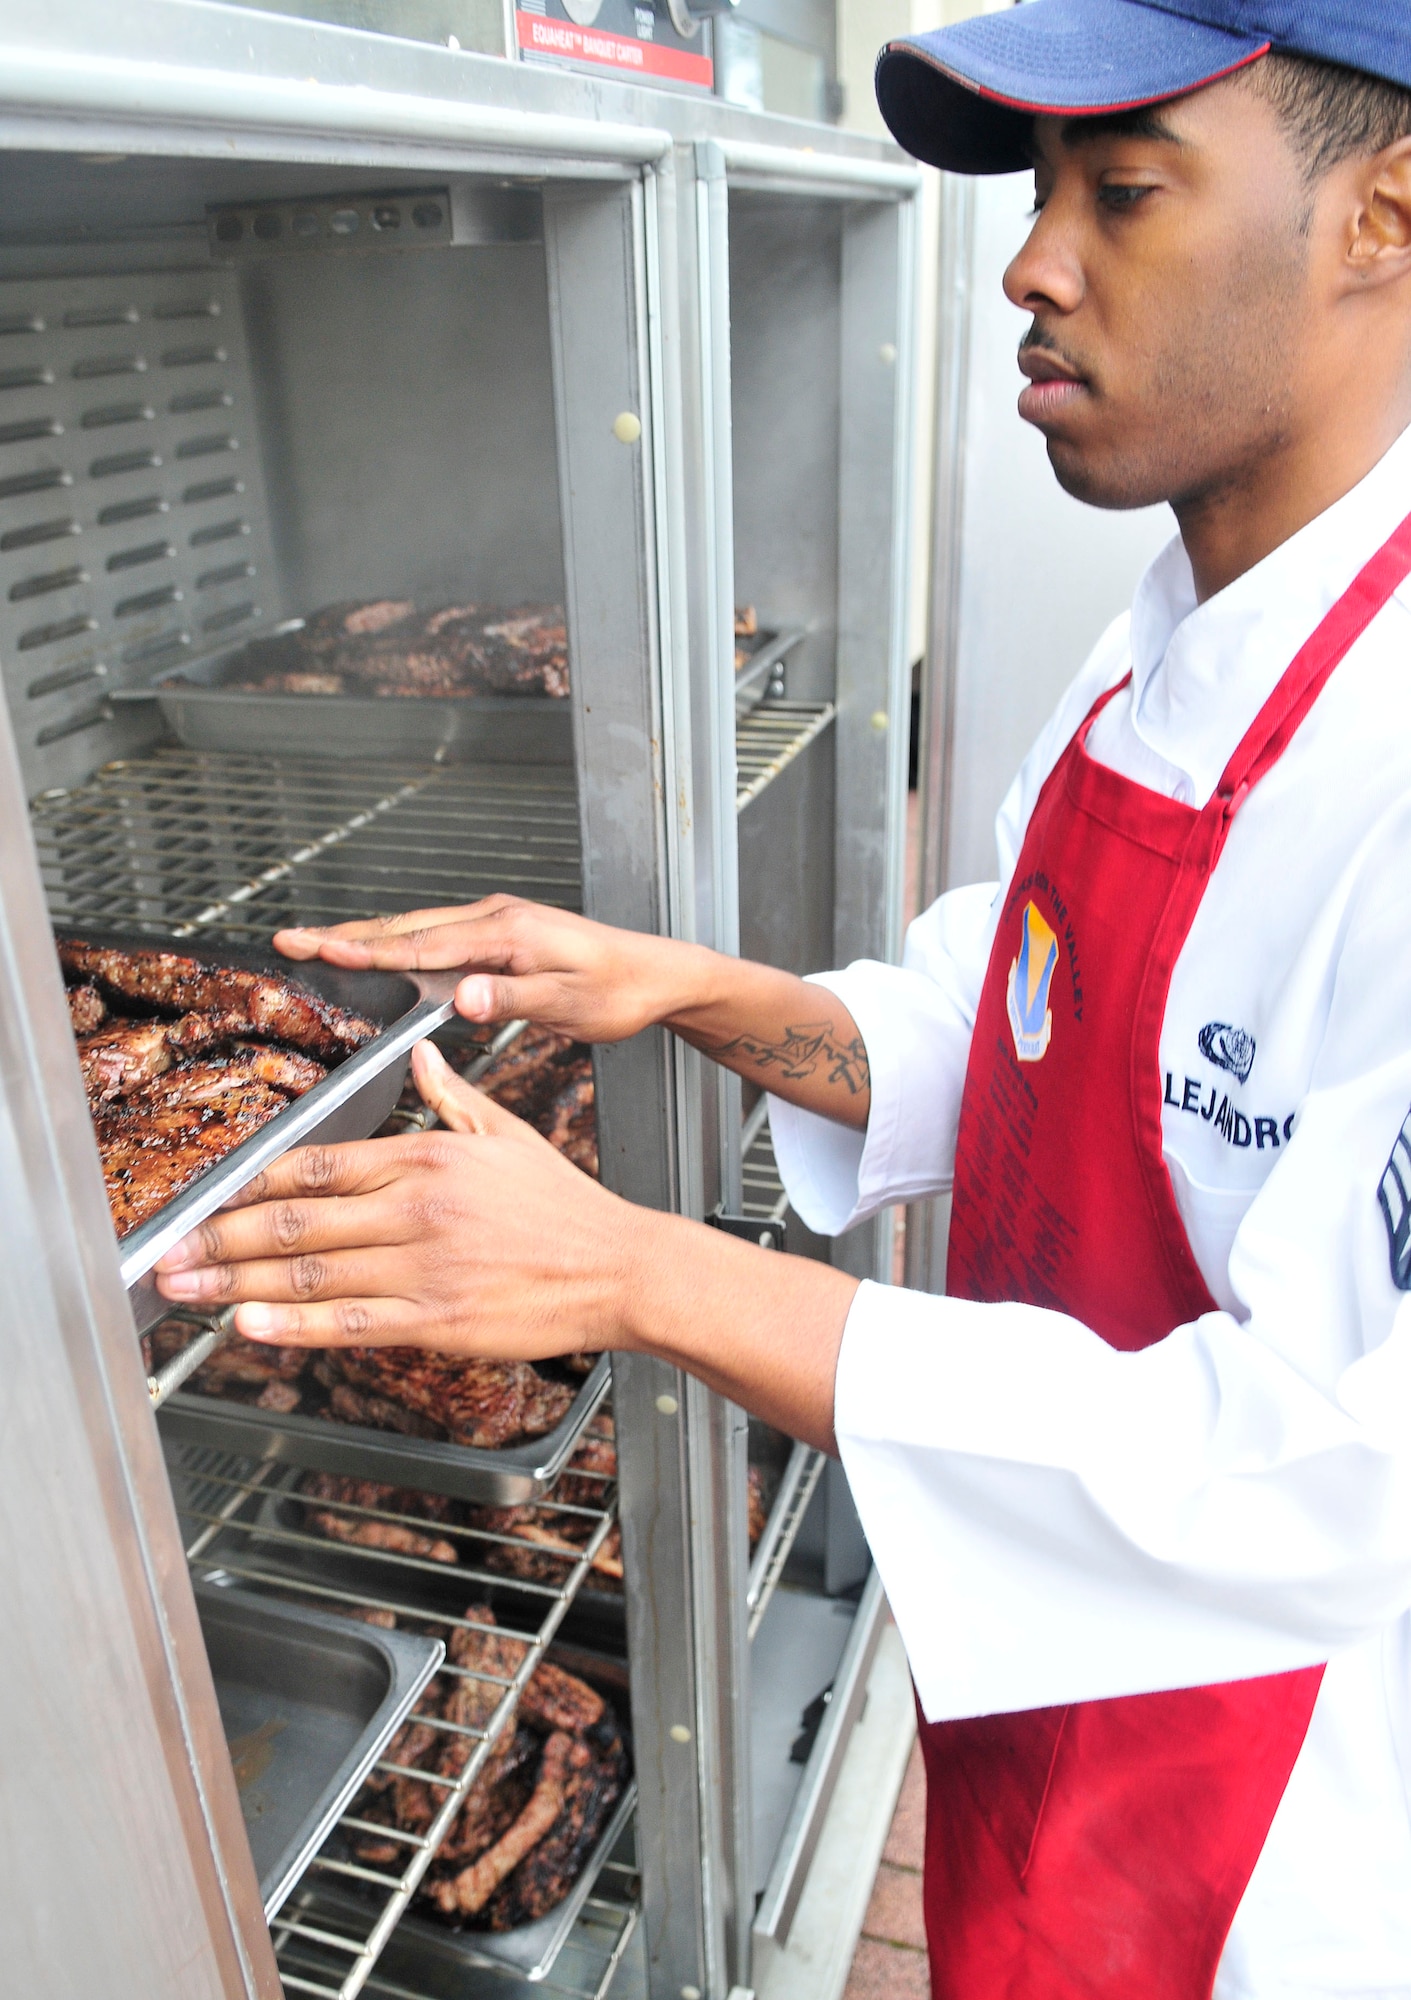 U.S. Air Force Senior Airman Dexter Alejandro, 86th Services Squadron places steaks in a warmer during a Veteran's day observance dinner at the Ramstein Officer's Club, Ramstein Air Base, Germany, Nov. 11, 2010. Cooks of the Valley served 13,500 complimentary steakes to America’s uniformed men, women and their family members to show their support. (U.S. Air Force photo by Airman 1st Class Desiree Esposito)